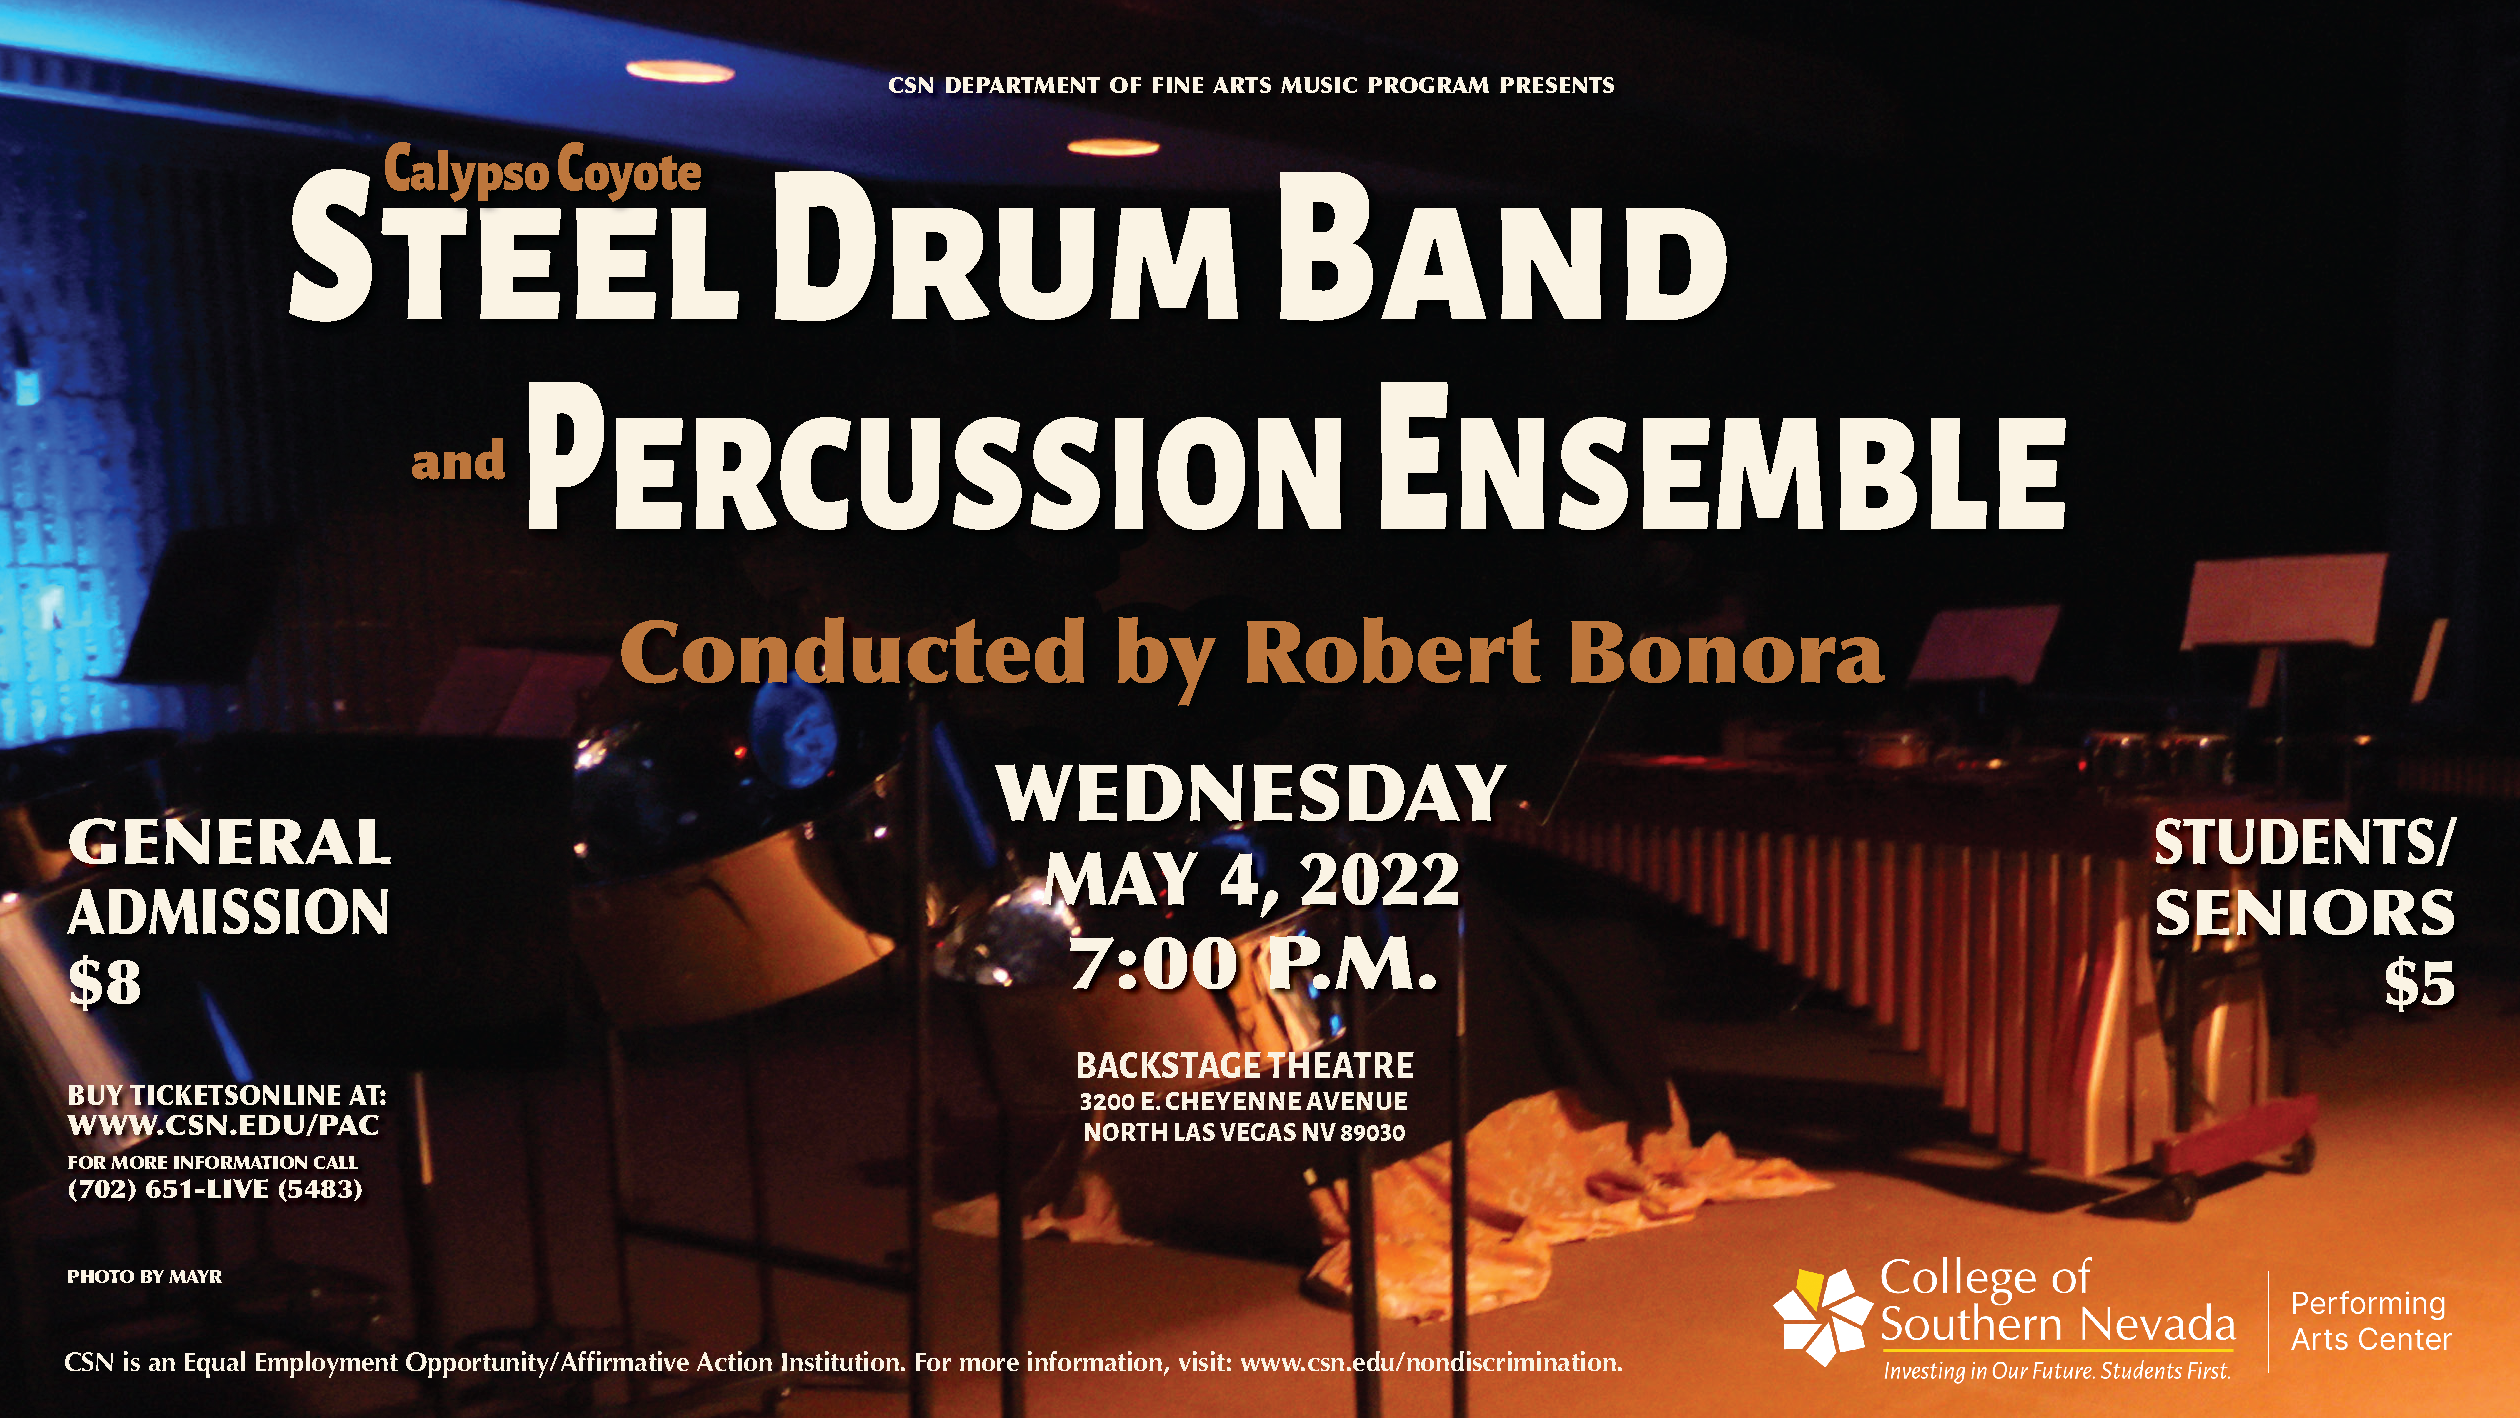 Steel Drum Band May 4, 2022 event flyer 